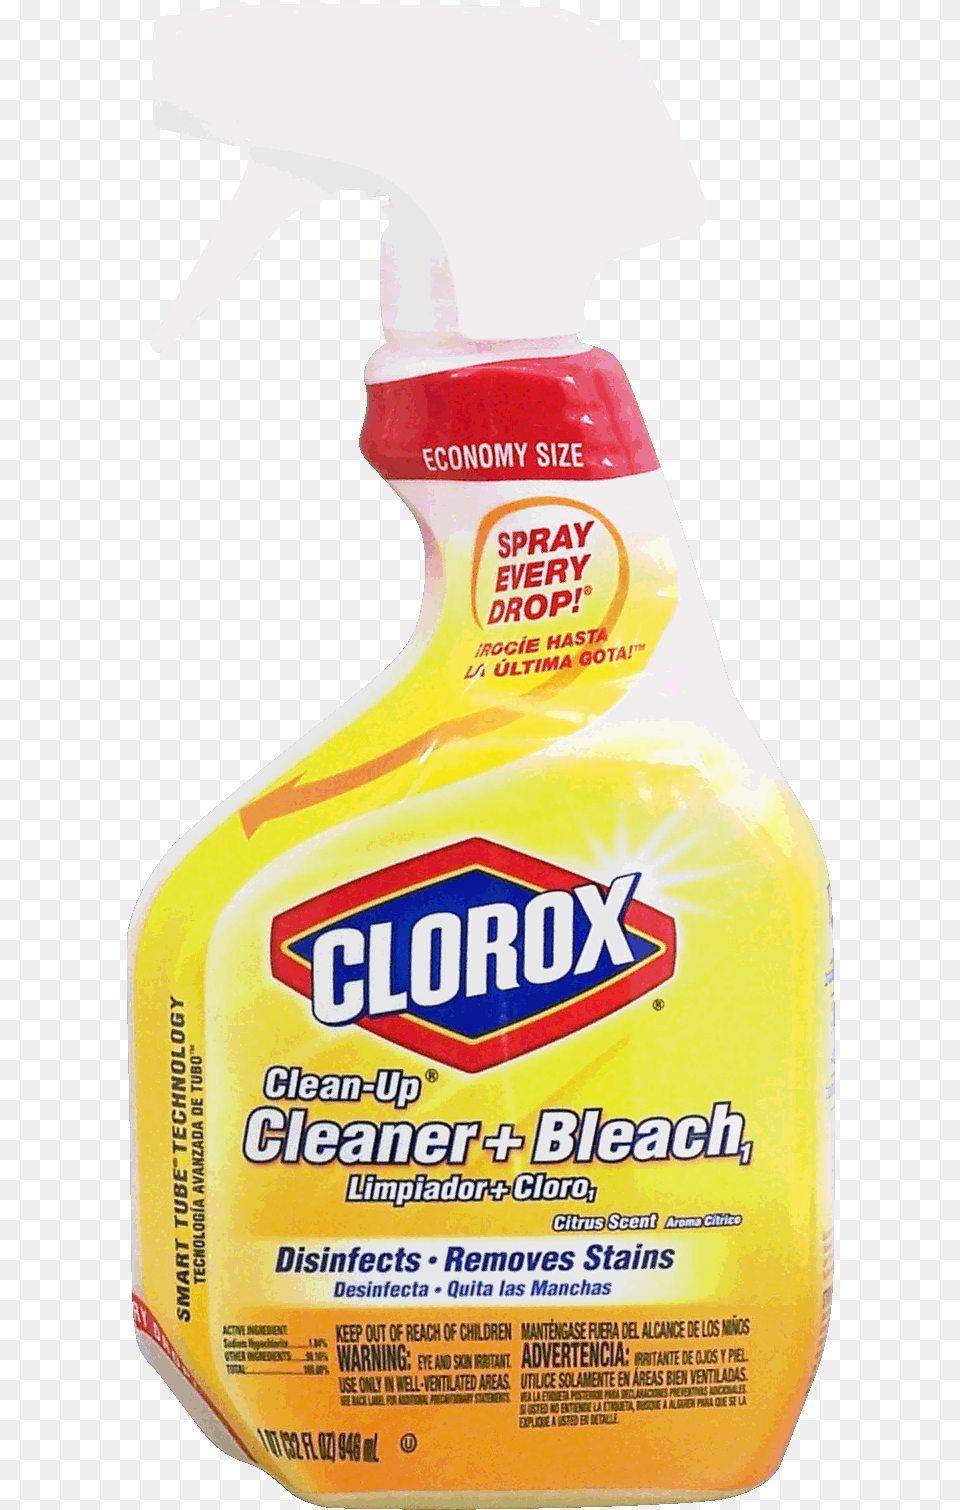 Clorox Clean Up Cleaner With Bleach Citrus Scent Full 4 Pack Clorox Blue Automatic Toilet Bowl Cleaner, Cleaning, Person, Tin, Food Png Image